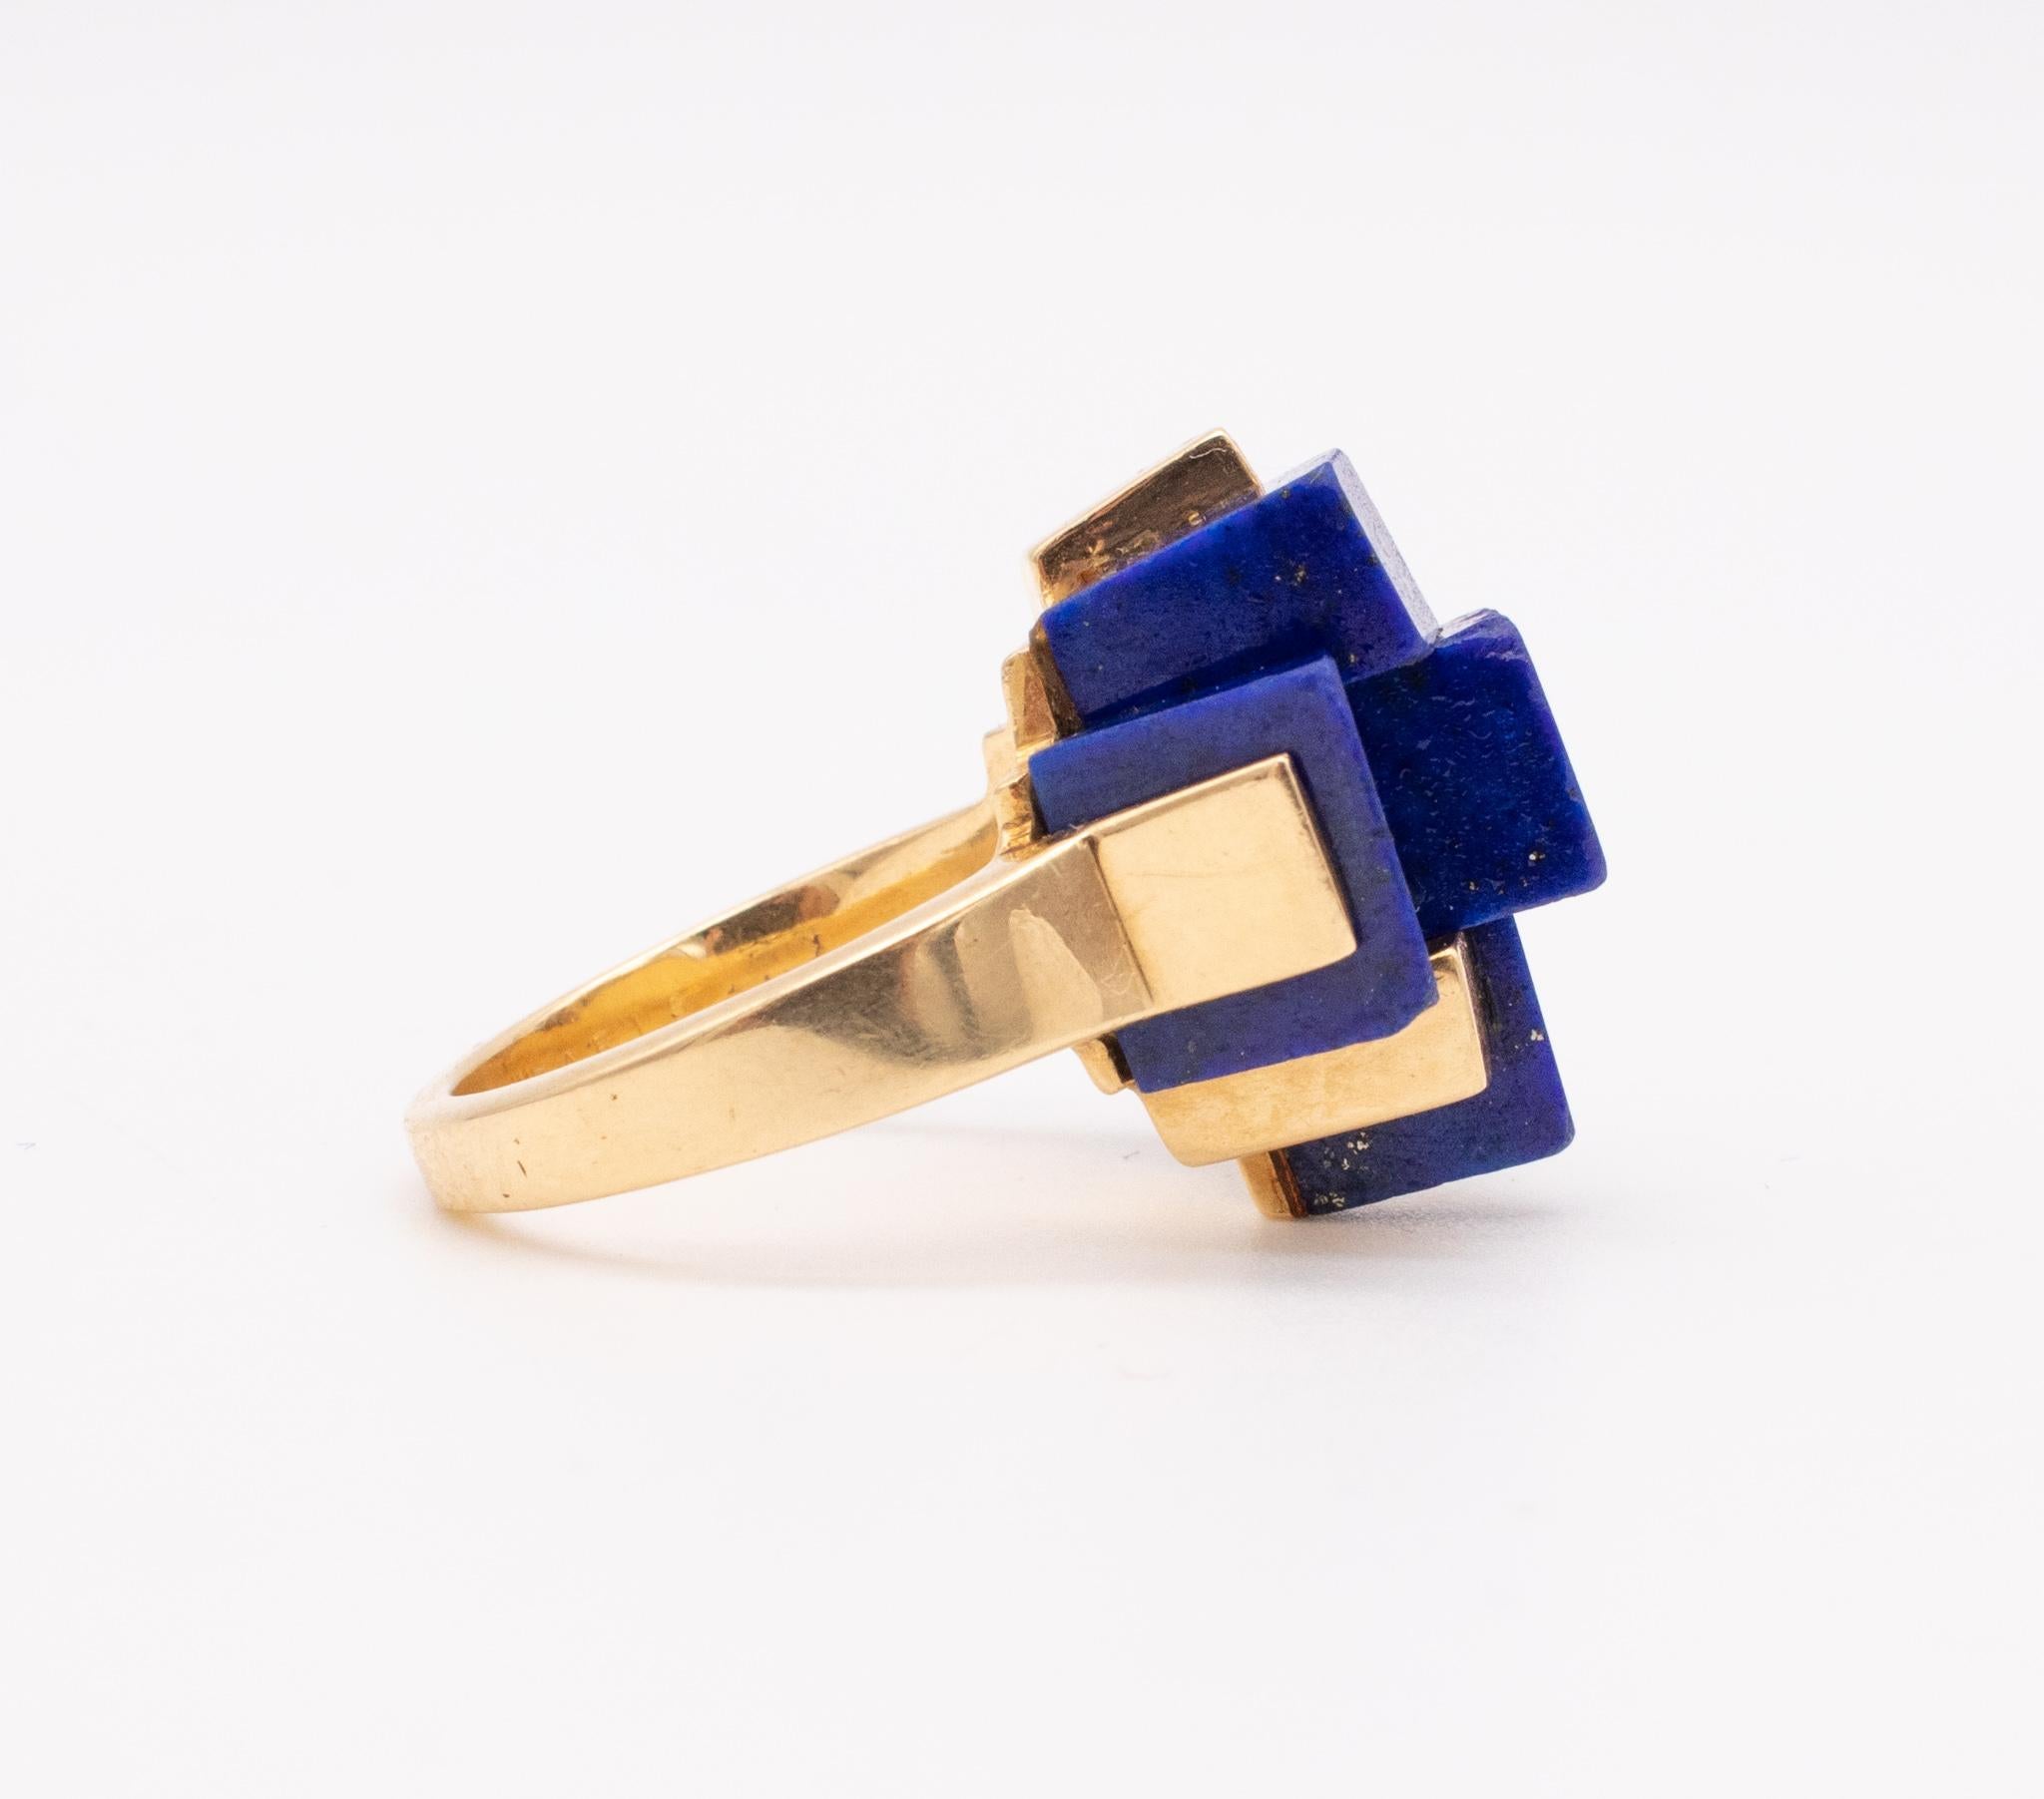 Mellerio 1970 Paris Rare Geometric 18Kt Yellow Gold Ring With Carved Lapis Lazul 3